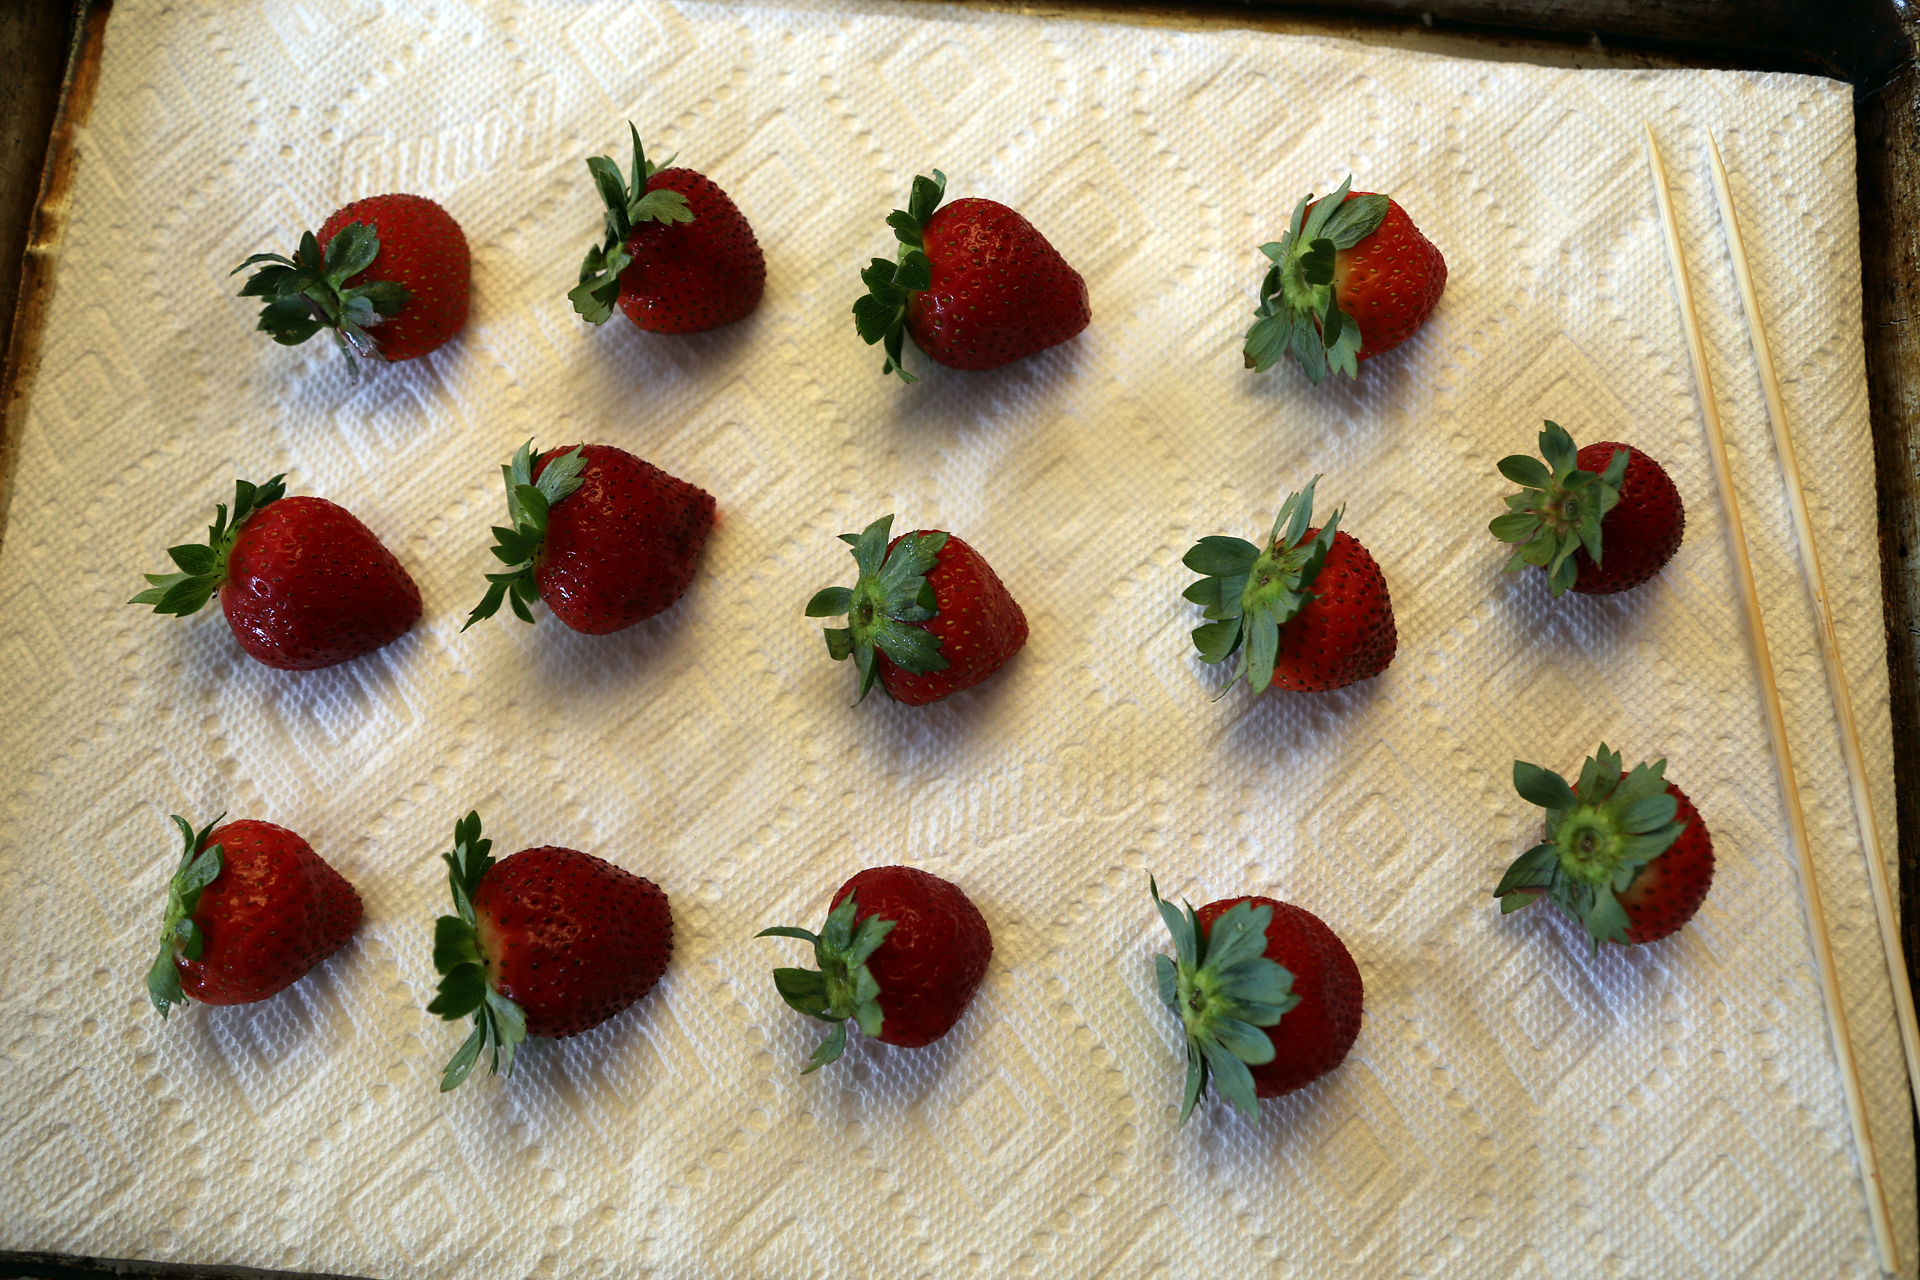 12 to 16 strawberries, rinsed and wiped clean and dry.